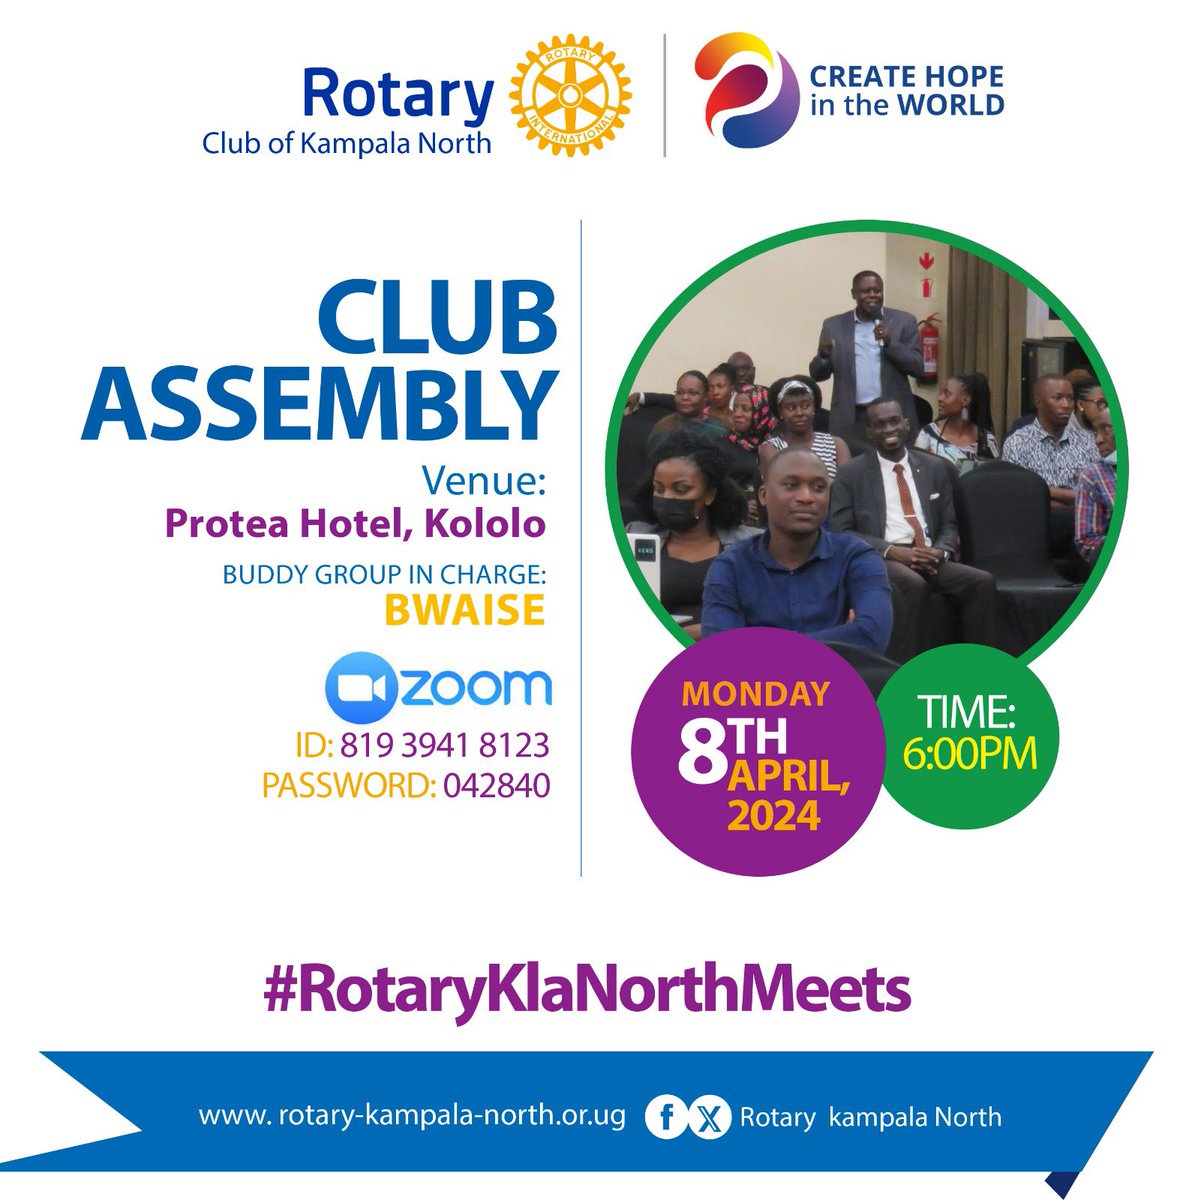 Make a date with us this Monday at #RotaryKlaNorthMeets as we host our Open club assembly at @ProteaKampalaH. Just tag along with a friend 😎